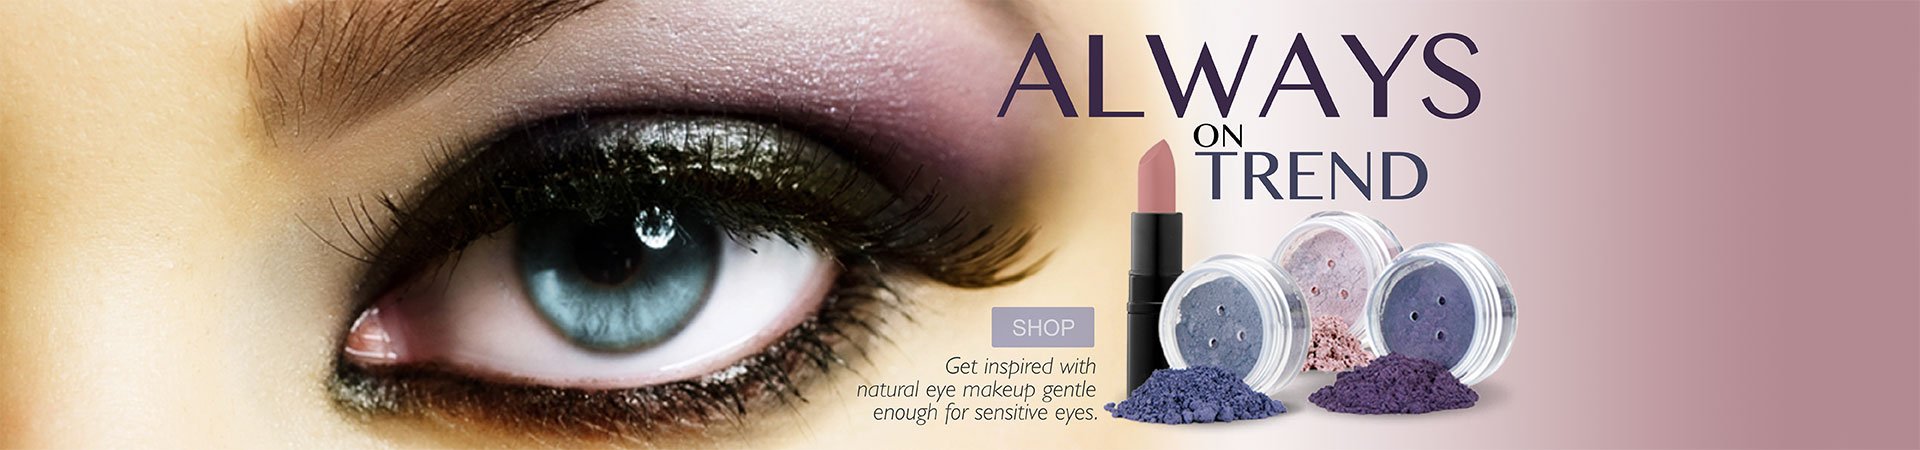 Always on Trend mineral makeup homepage promotion